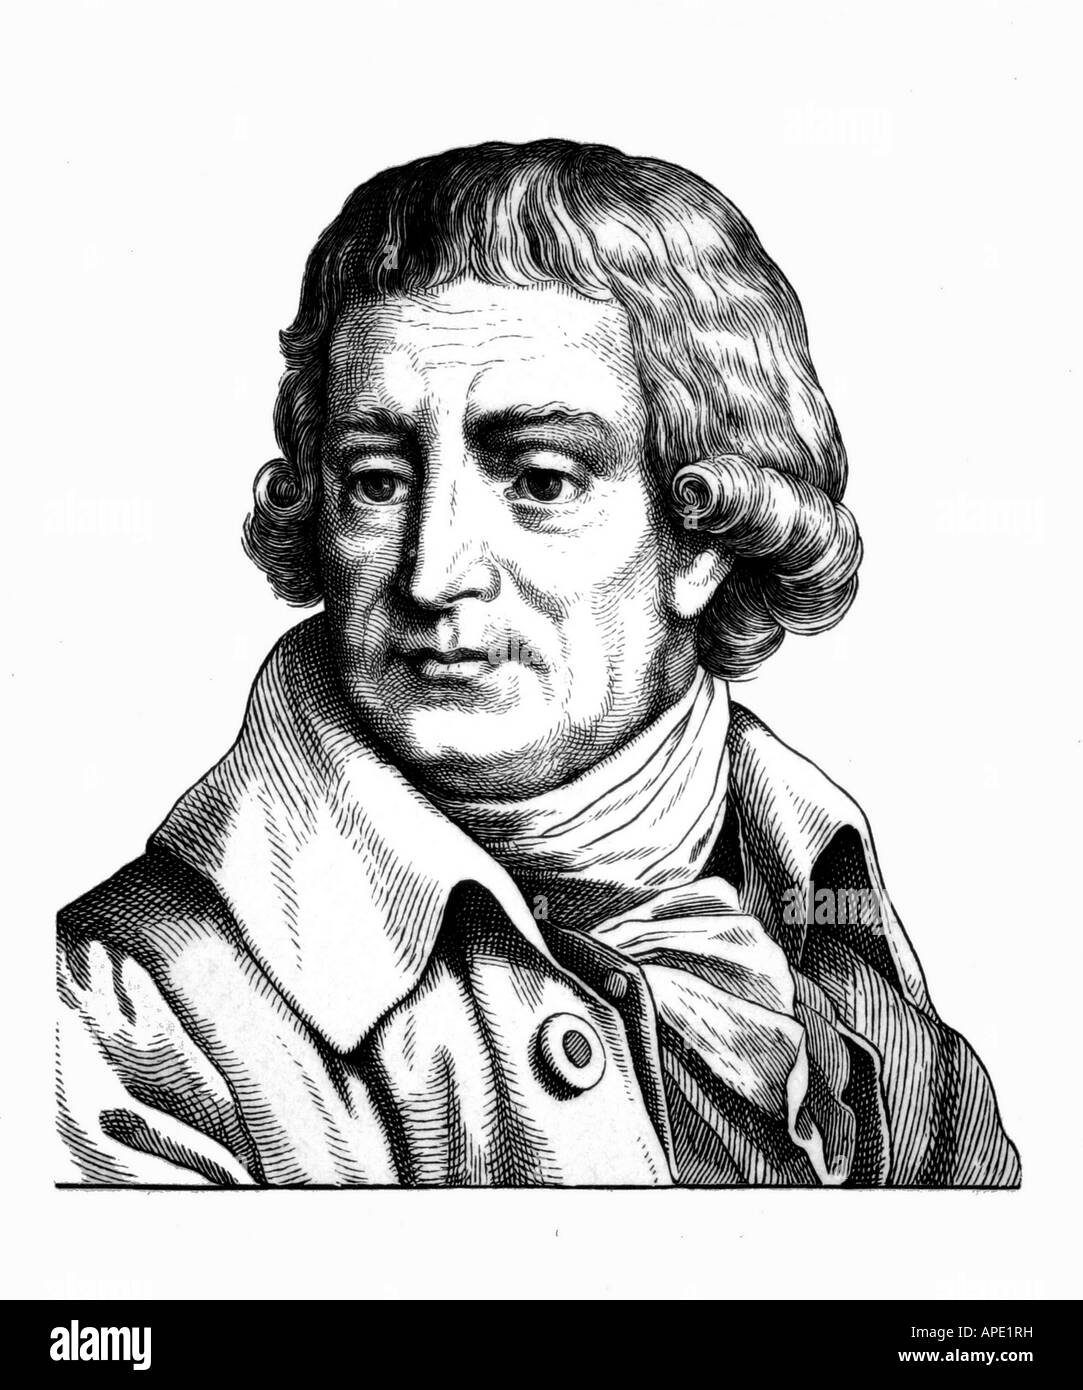 Heyne, Christian Gottlob, 25.9.1729 - 14.7.1812, German philologer, portrait, steel engraving, 19th century, , Artist's Copyright has not to be cleared Stock Photo